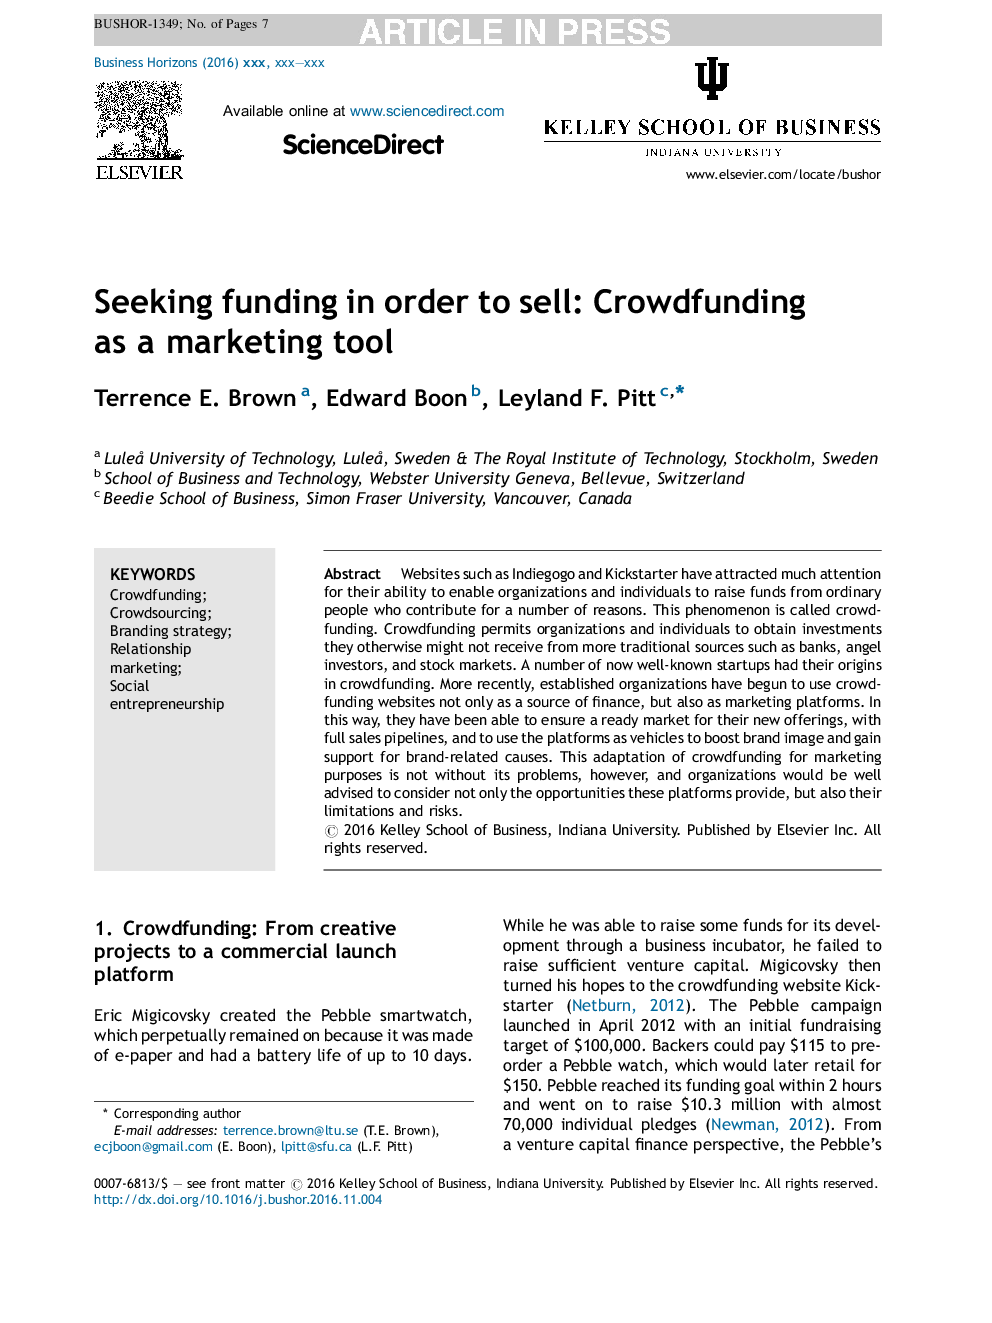 Seeking funding in order to sell: Crowdfunding as a marketing tool